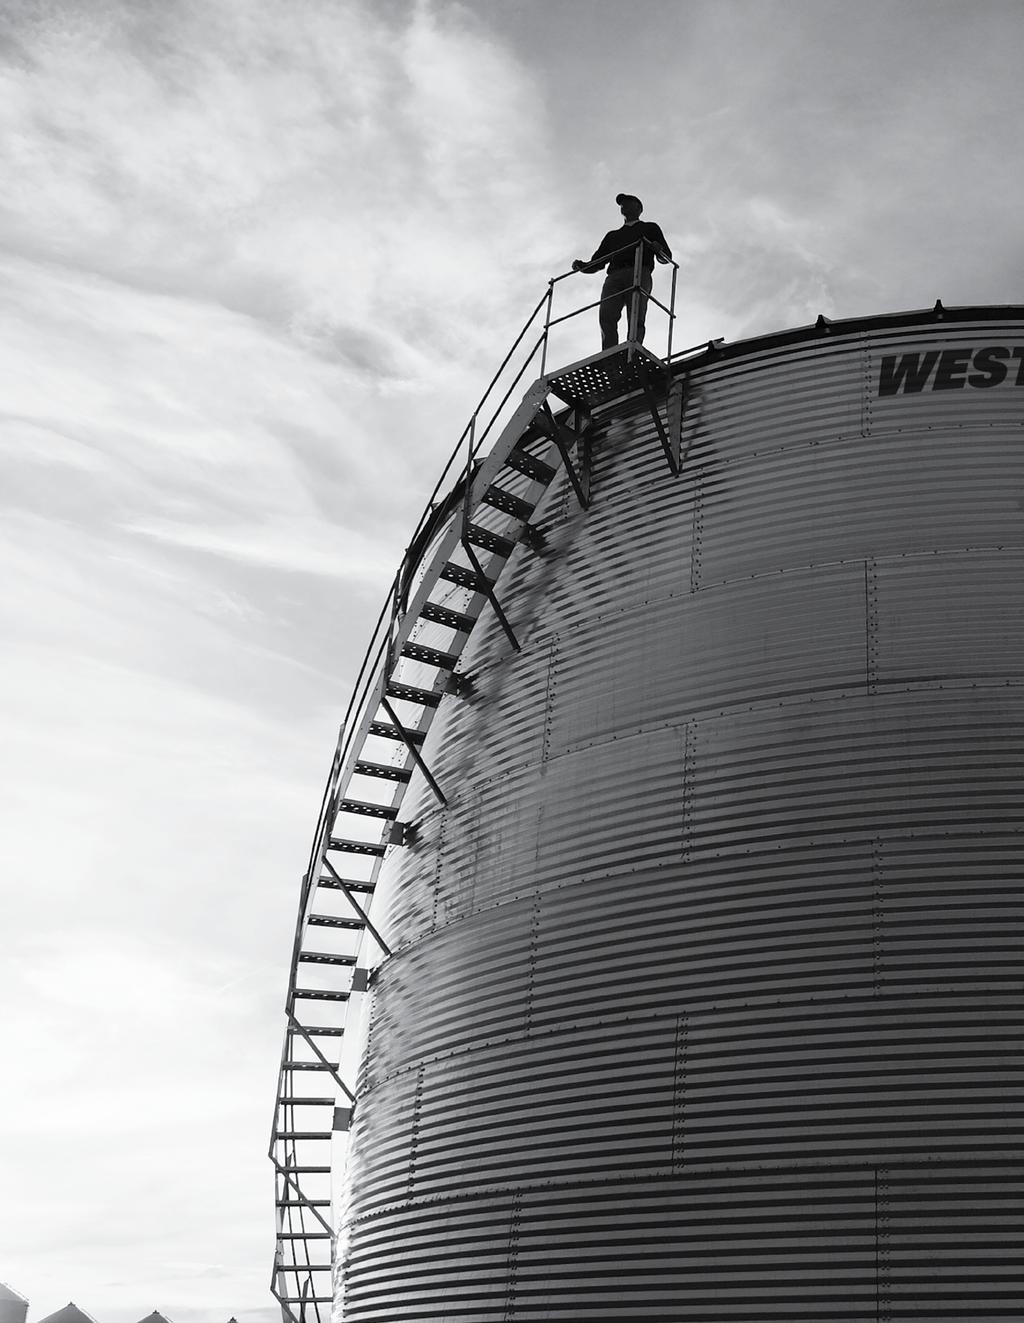 Quality in steel since 1905 Westeel has offered quality steel storage solutions to multiple industries for over a century.